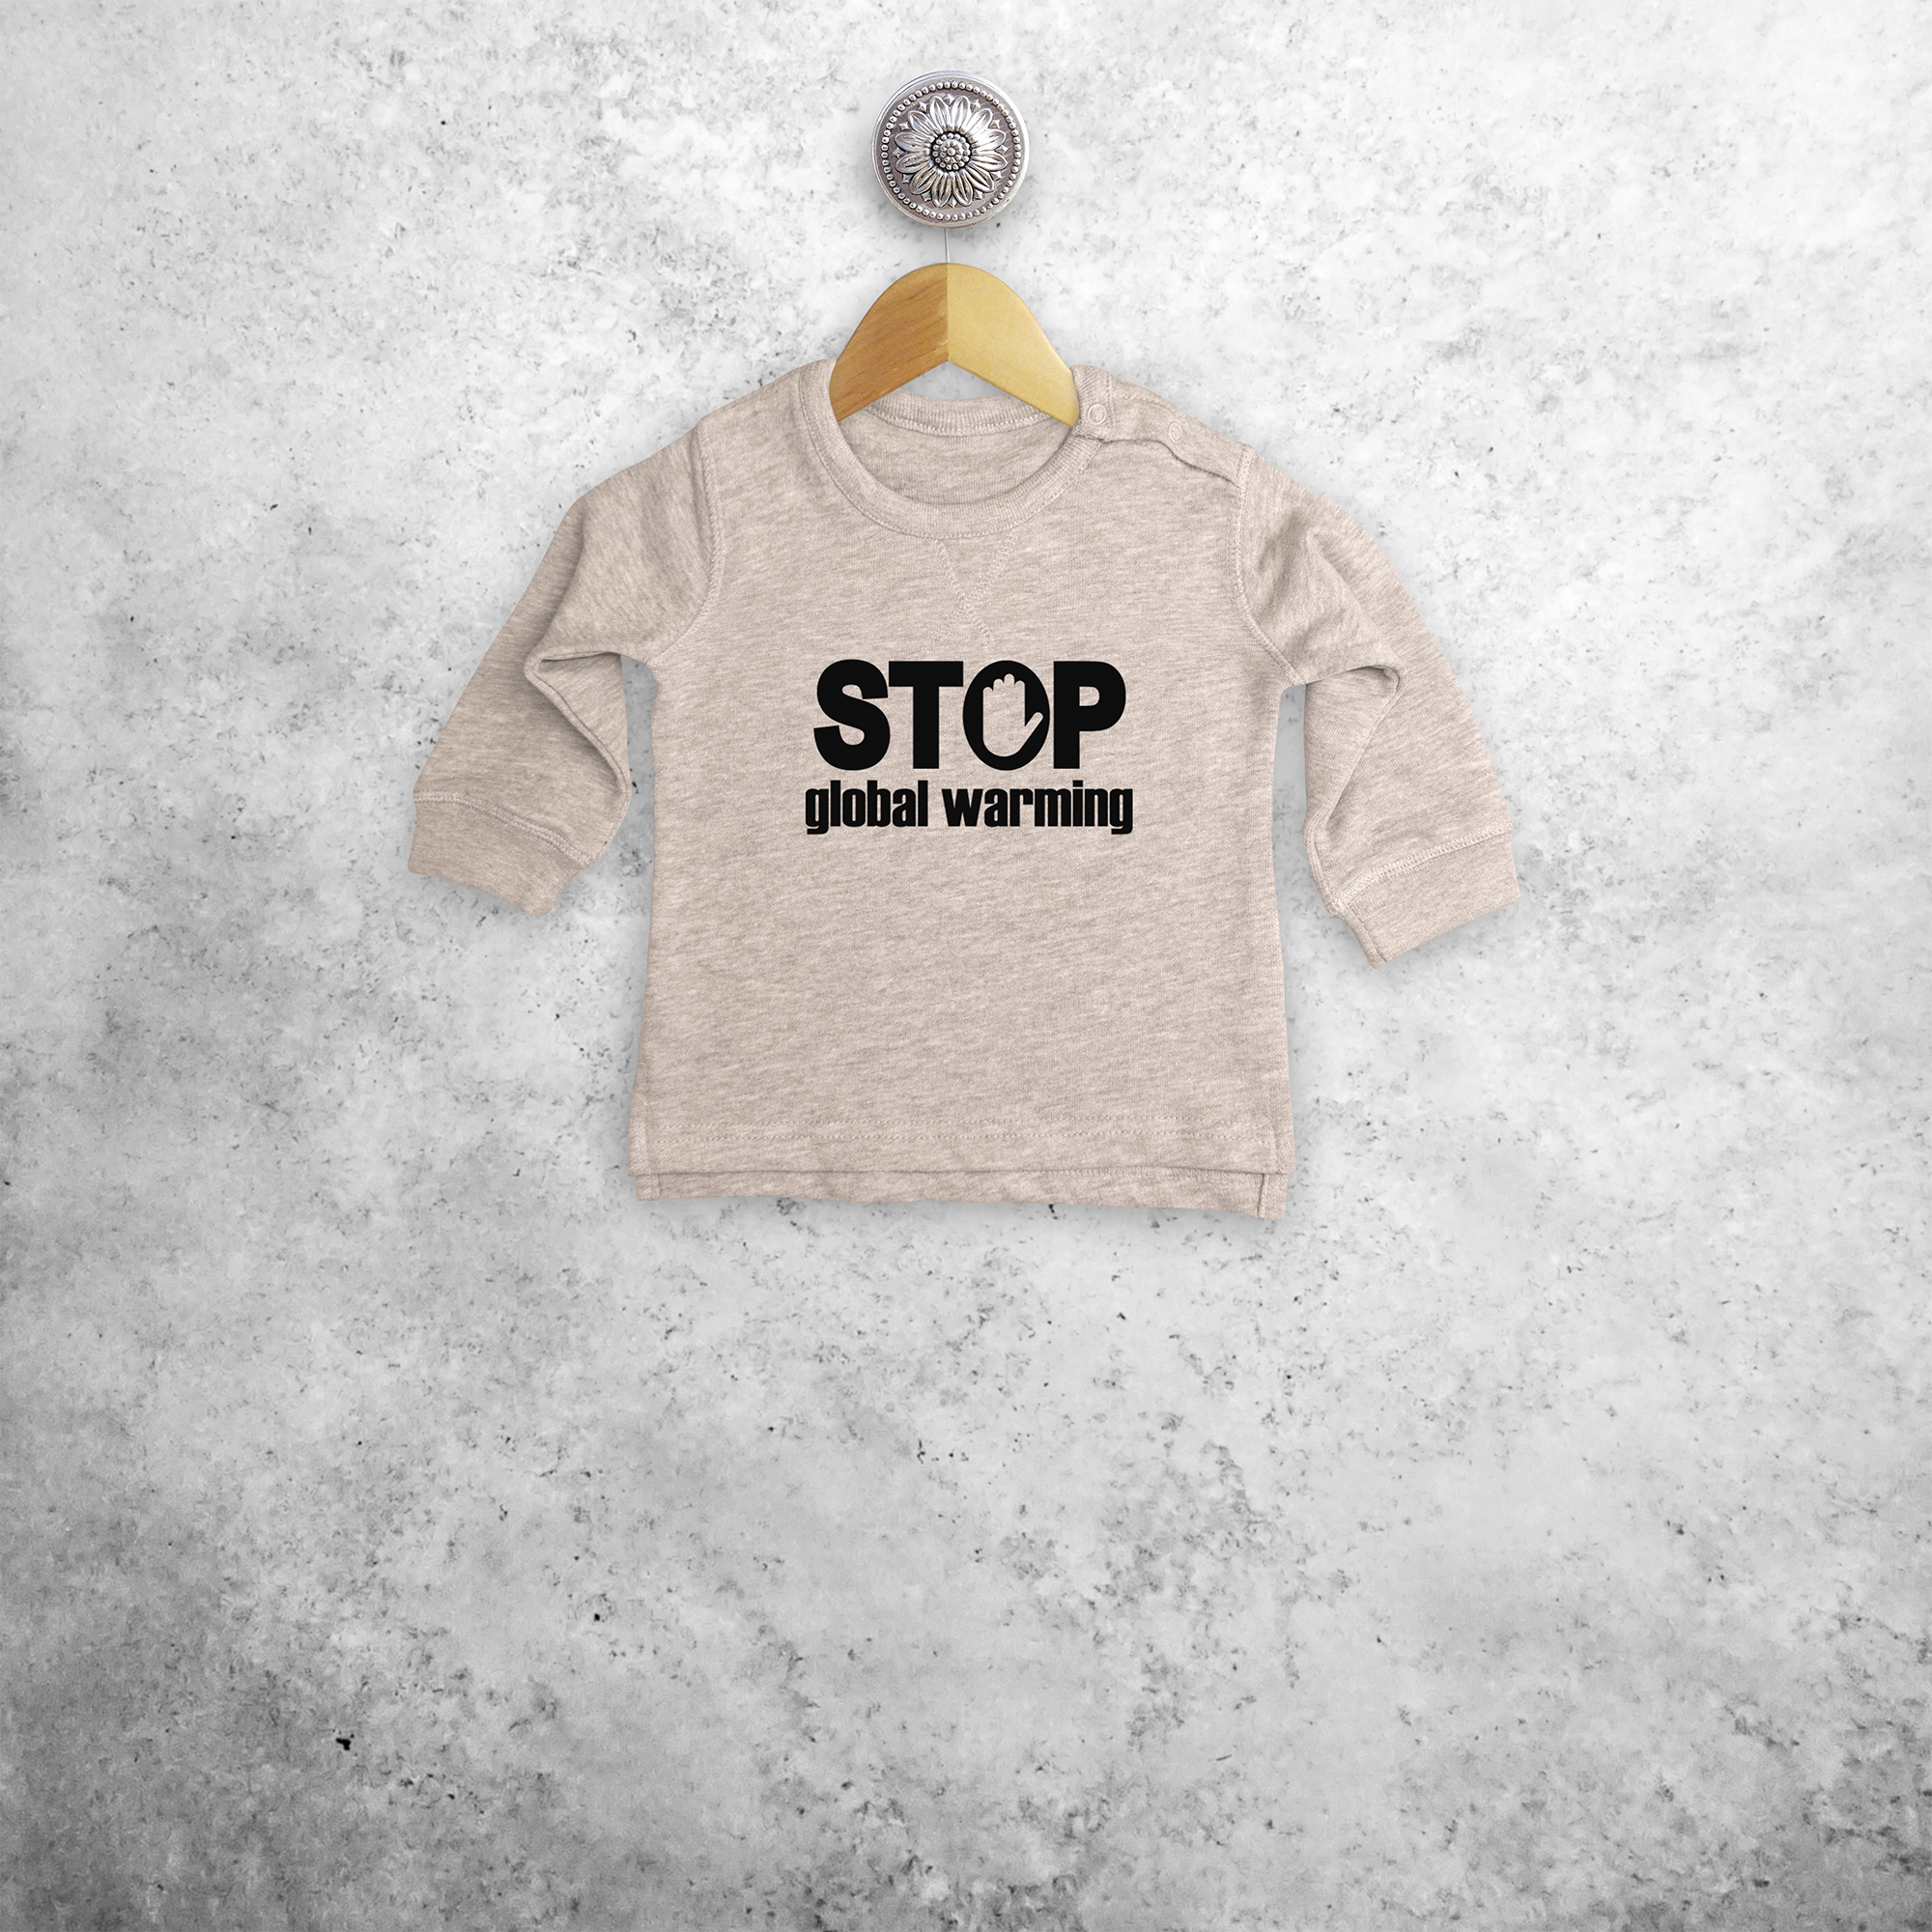 'Stop global warming' baby sweater